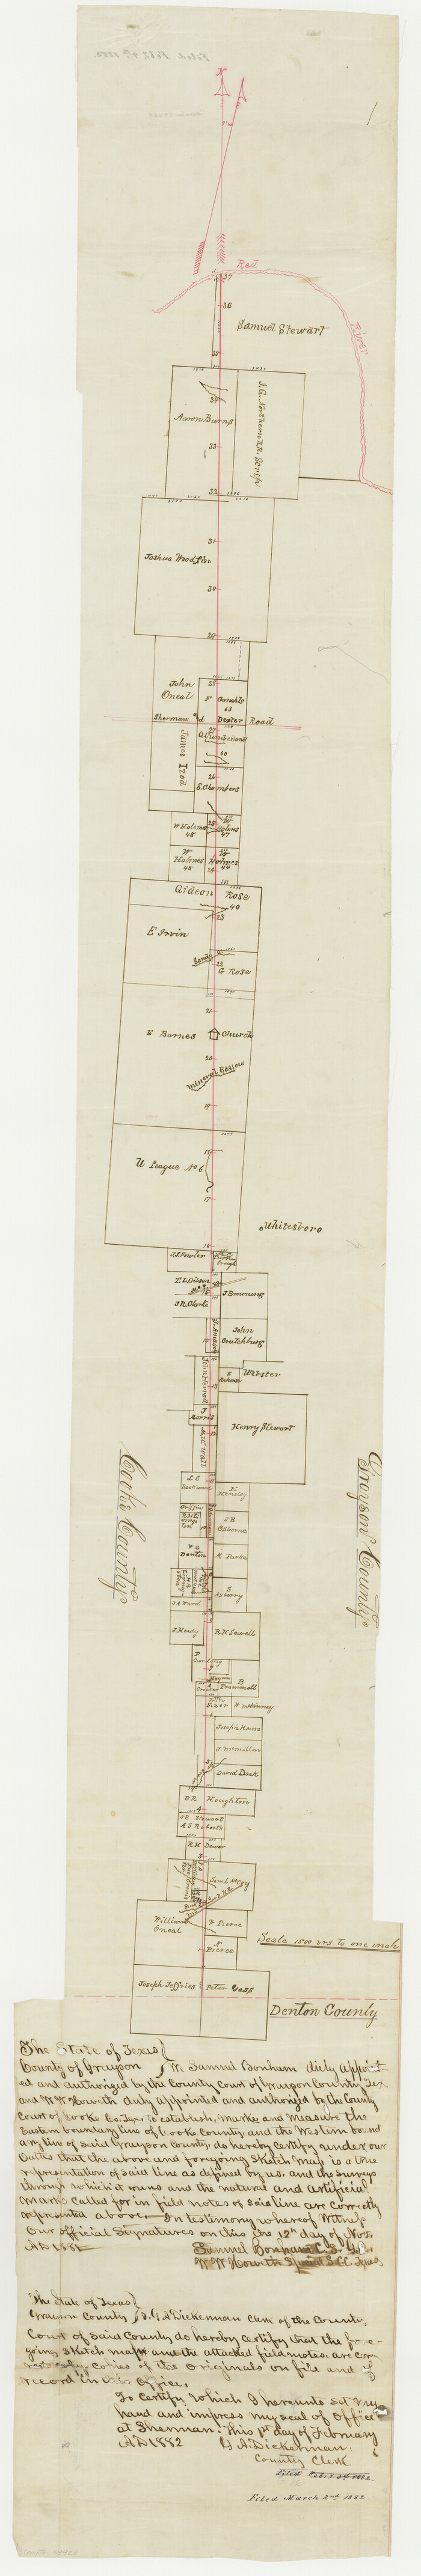 53928, Grayson County Boundary File 1a, General Map Collection